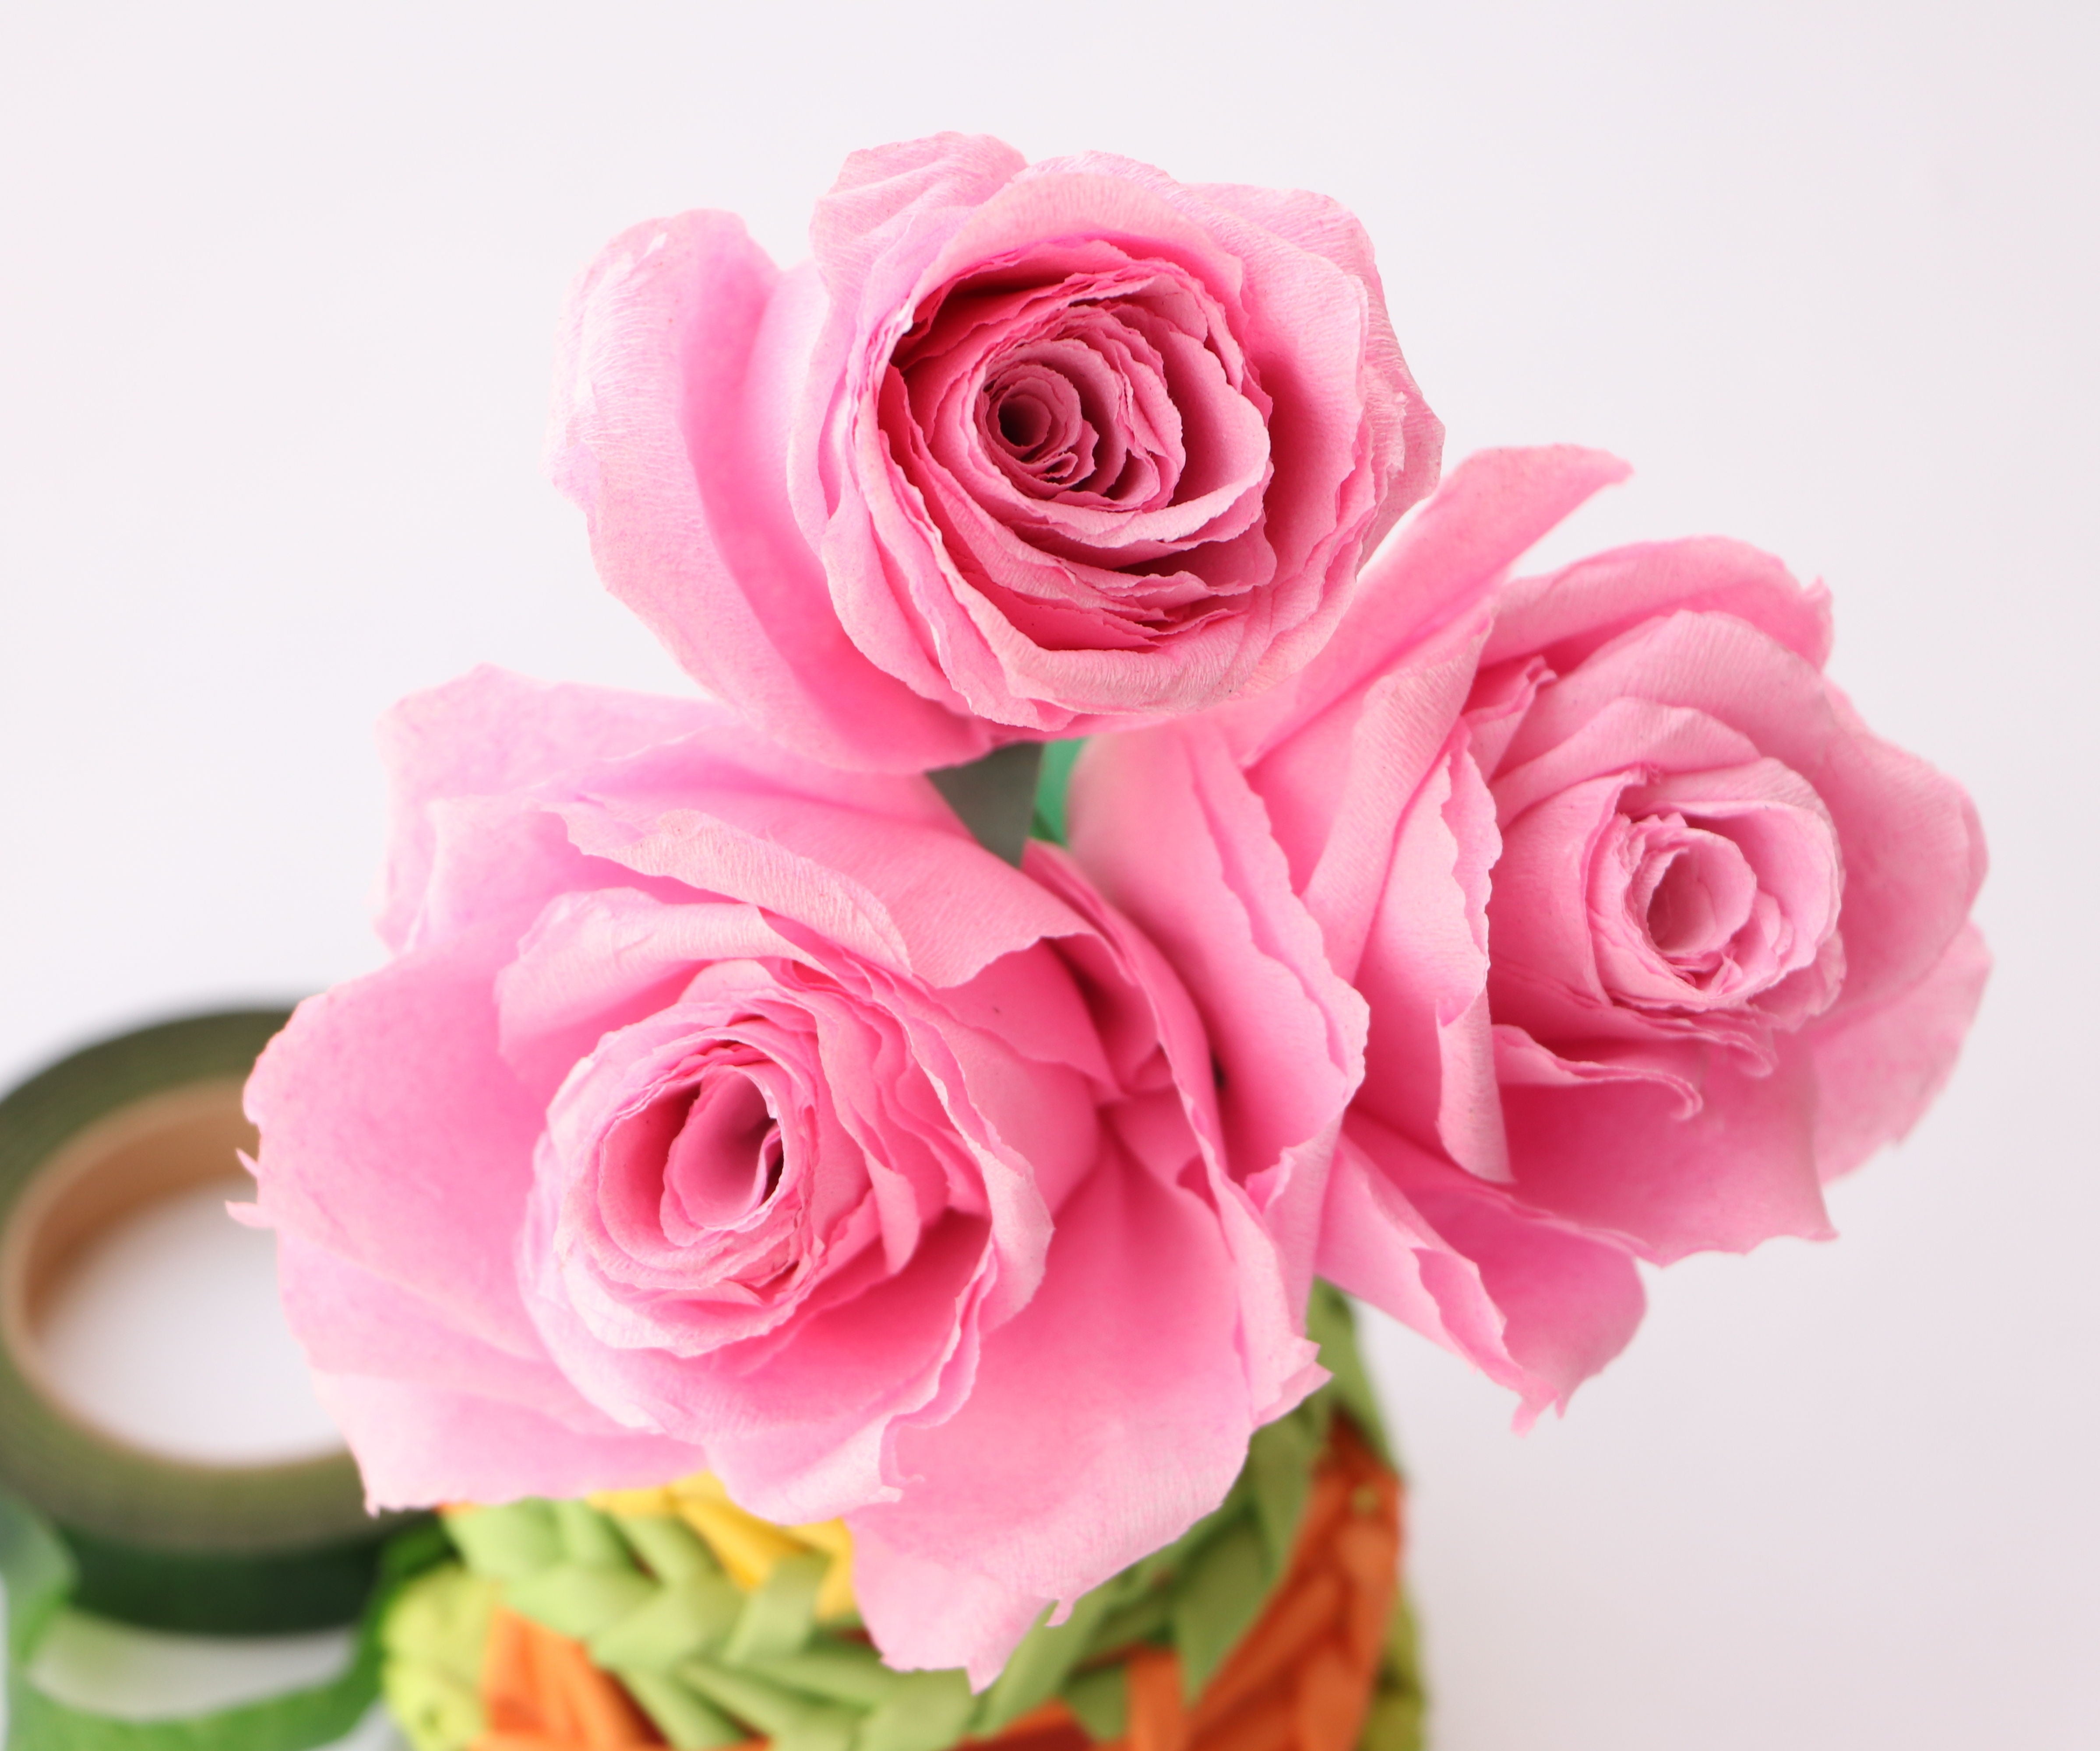 How to Make Tissue Paper Roses